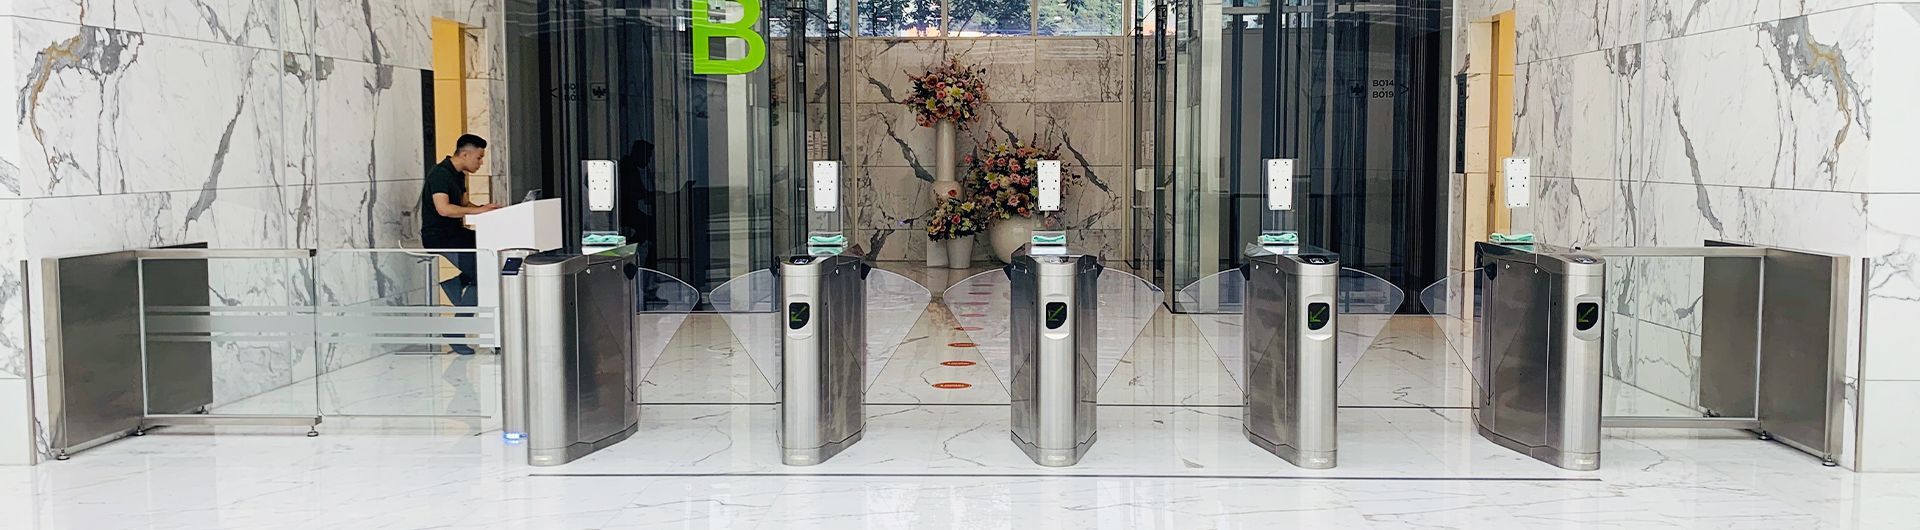 Flap Barriers Installation at HTC Headquarter